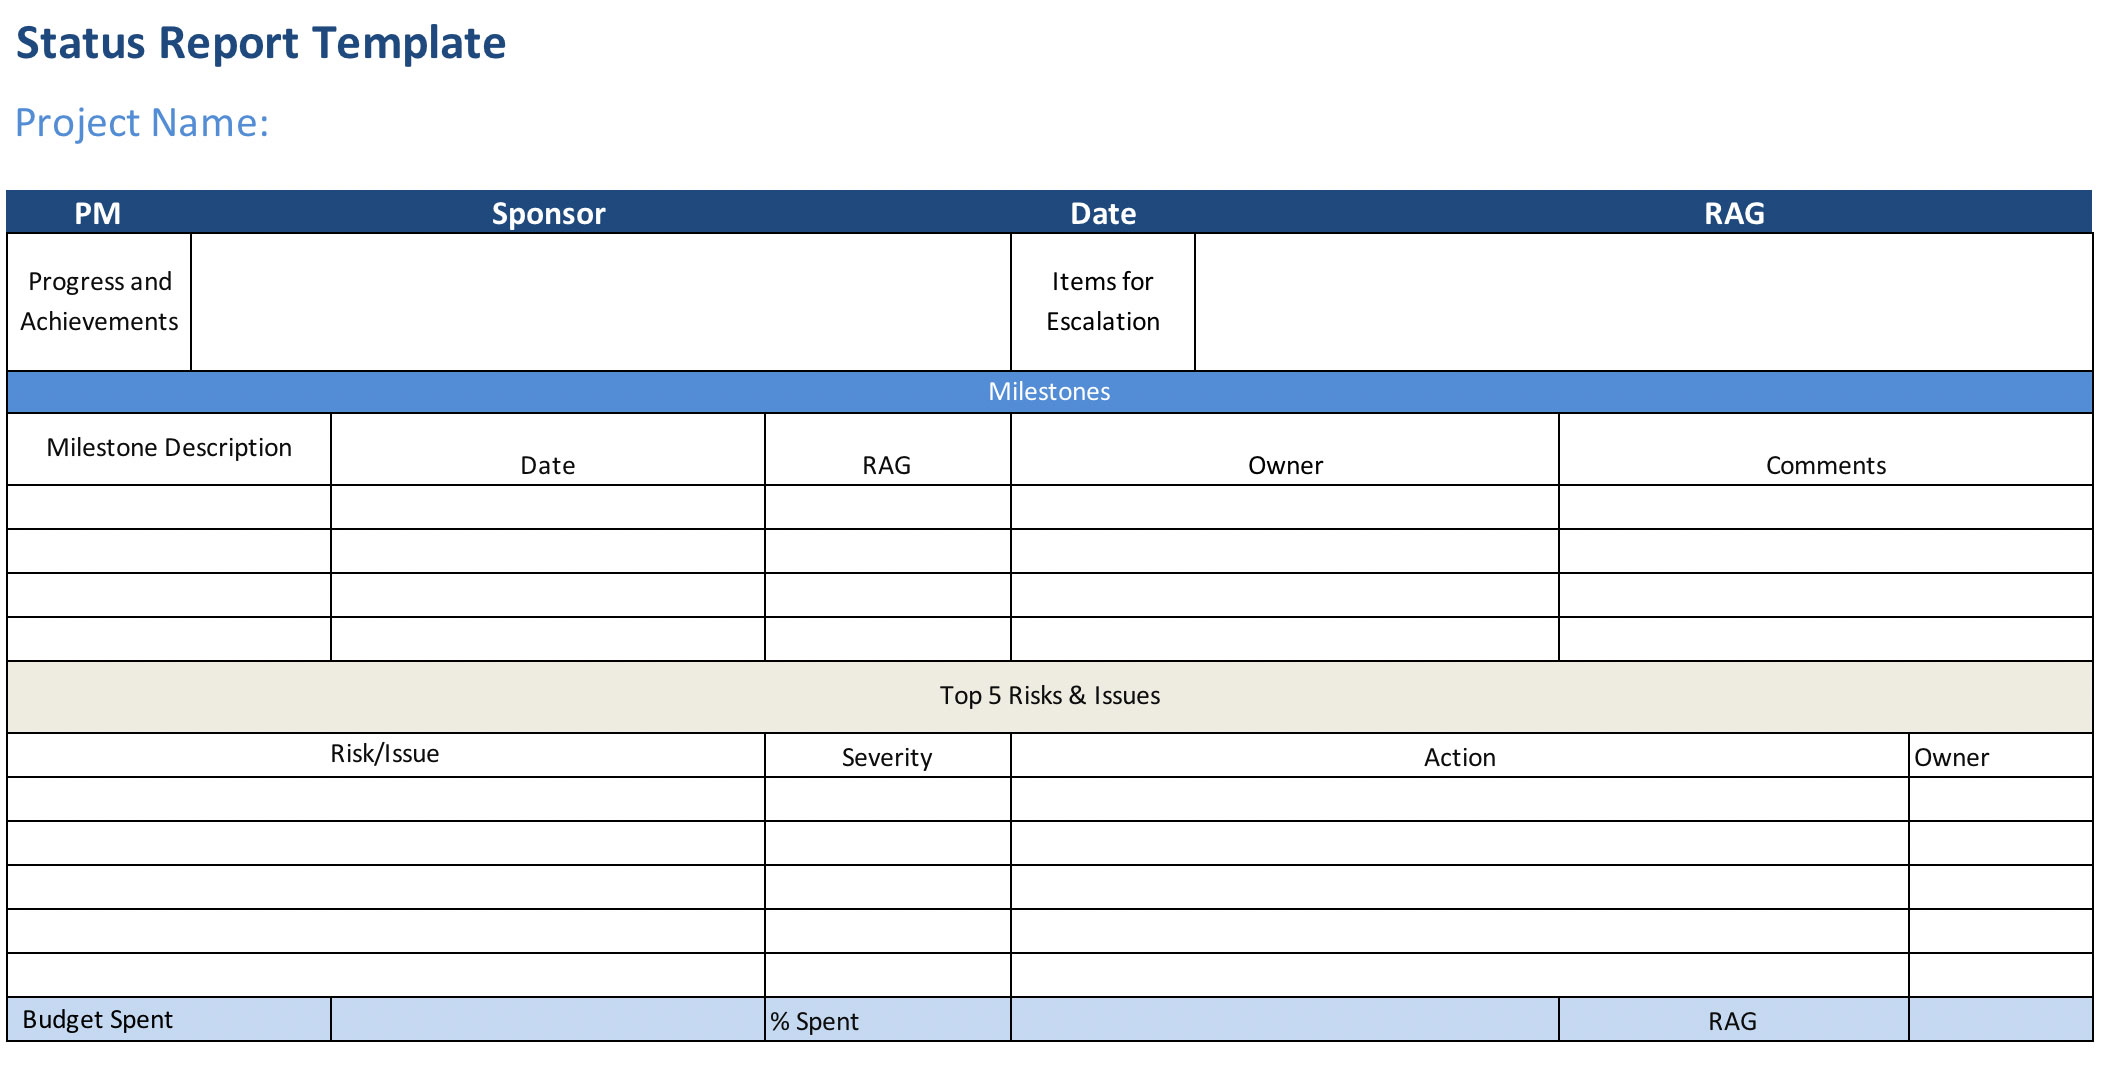 Daily Progress Report Format For Civil Works Excel from www.projectmanager.com